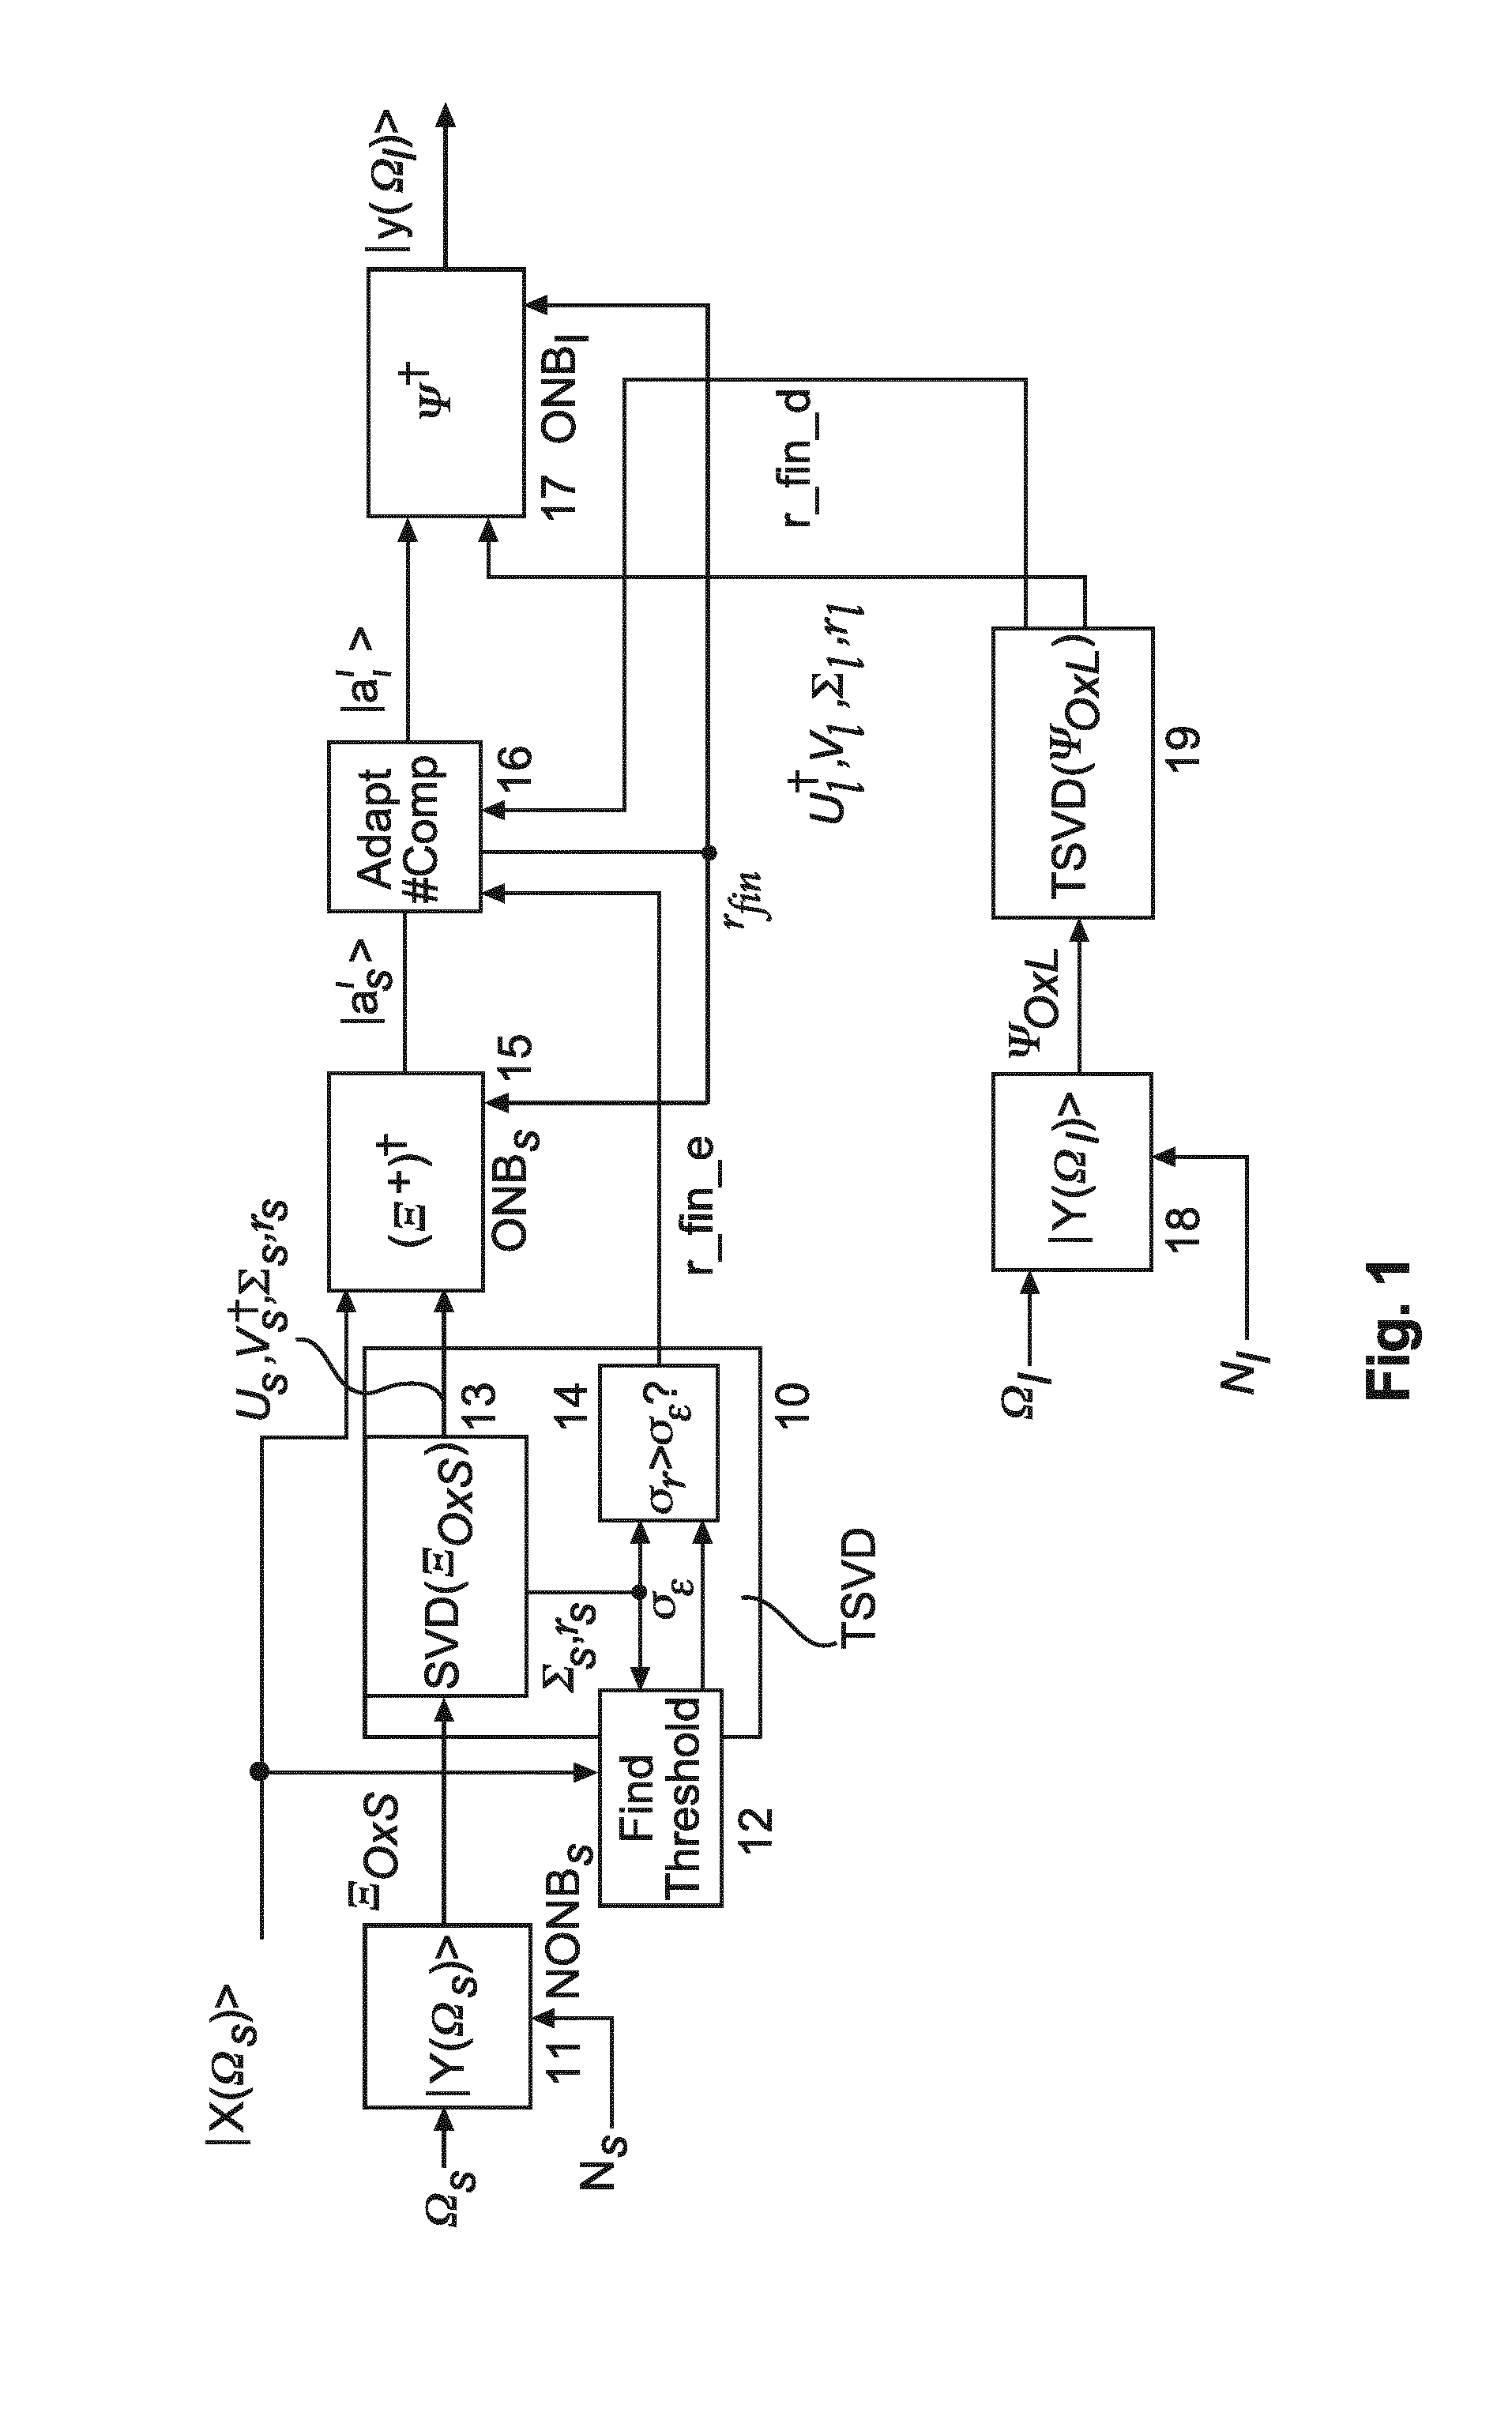 Method and apparatus for higher order ambisonics encoding and decoding using singular value decomposition